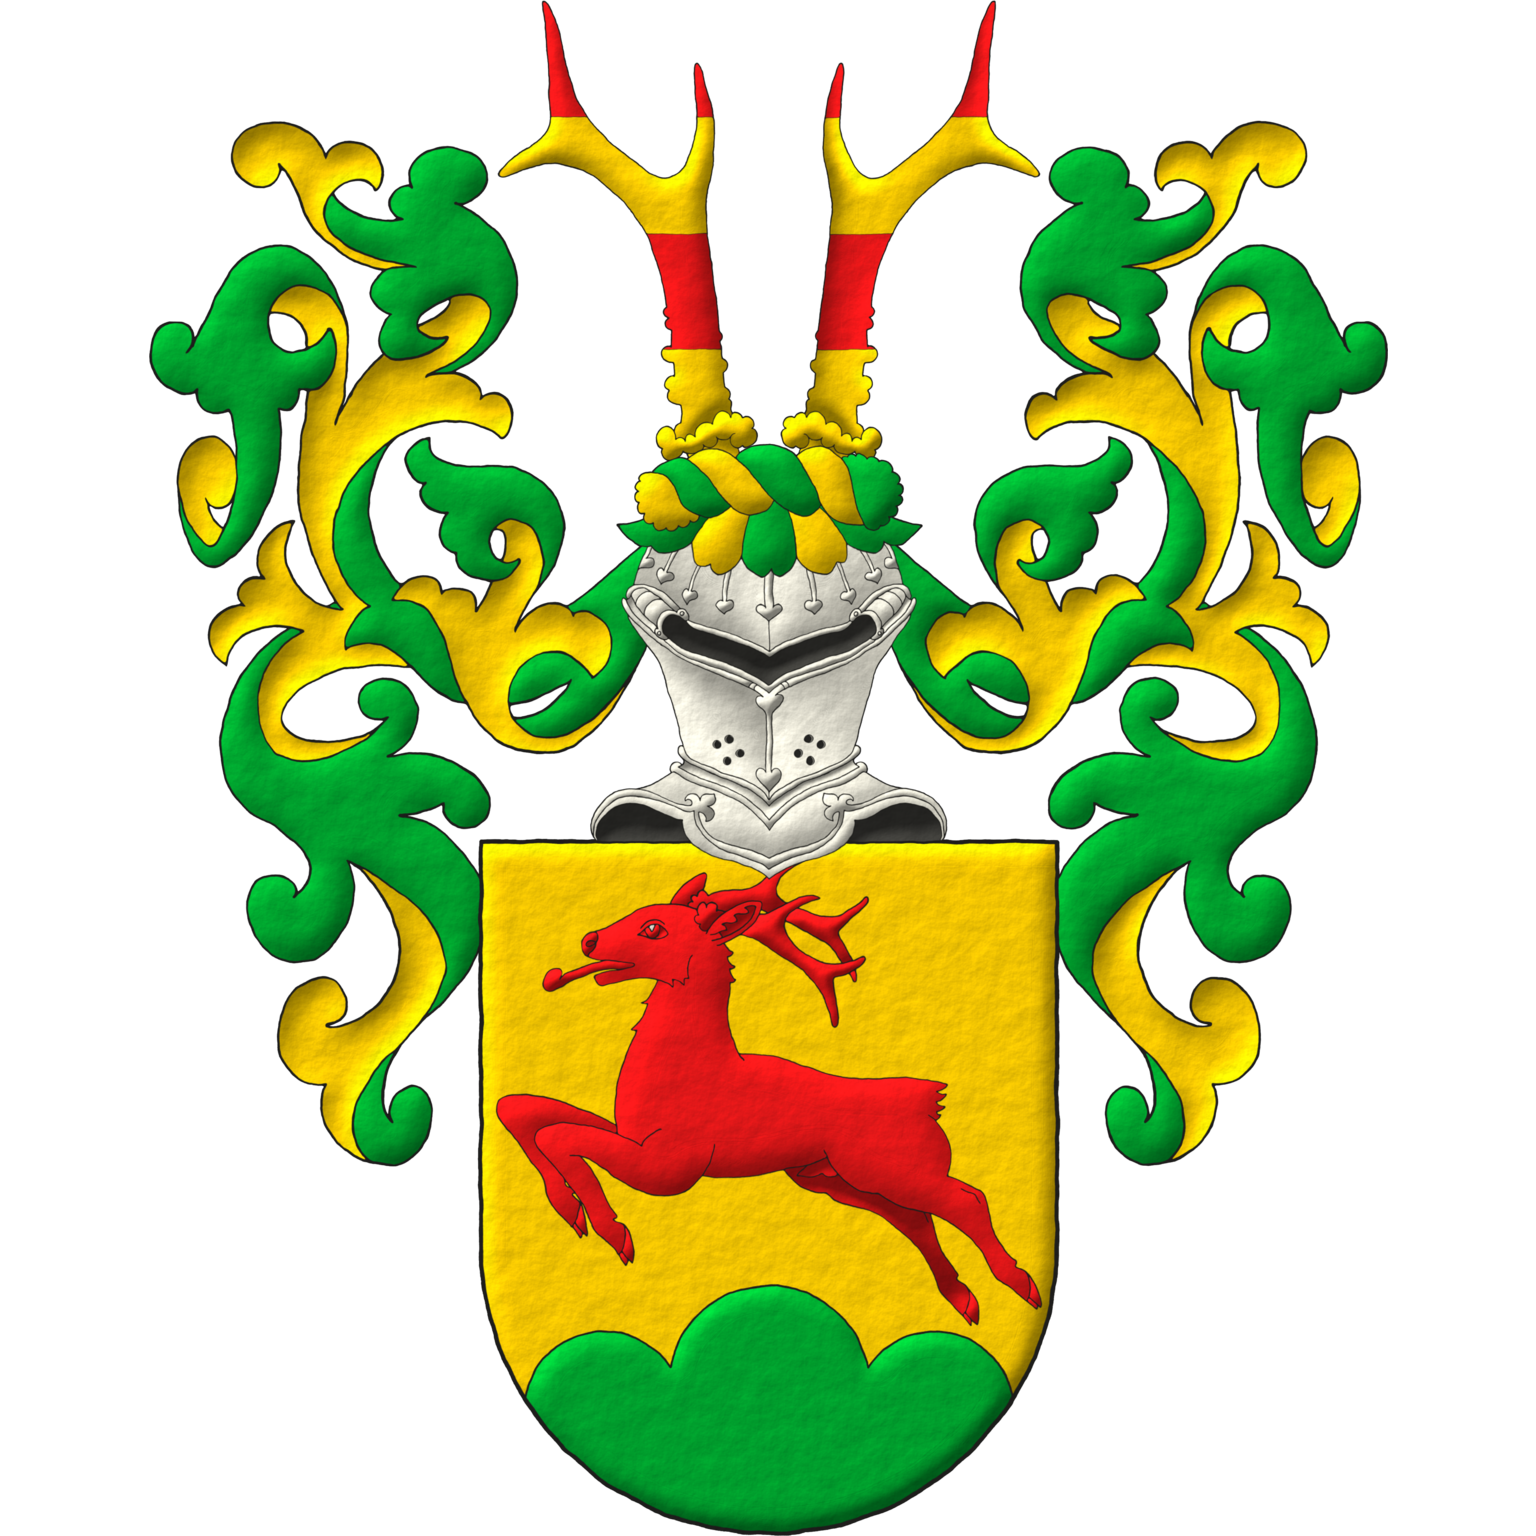 Or, a roe deer salient Gules, in base a trimount Vert. Crest: Upon a helm affronty, with a wreath Or and Vert, two roe deers' attires barry of four Gules and Or. Mantling: Vert doubled Or.